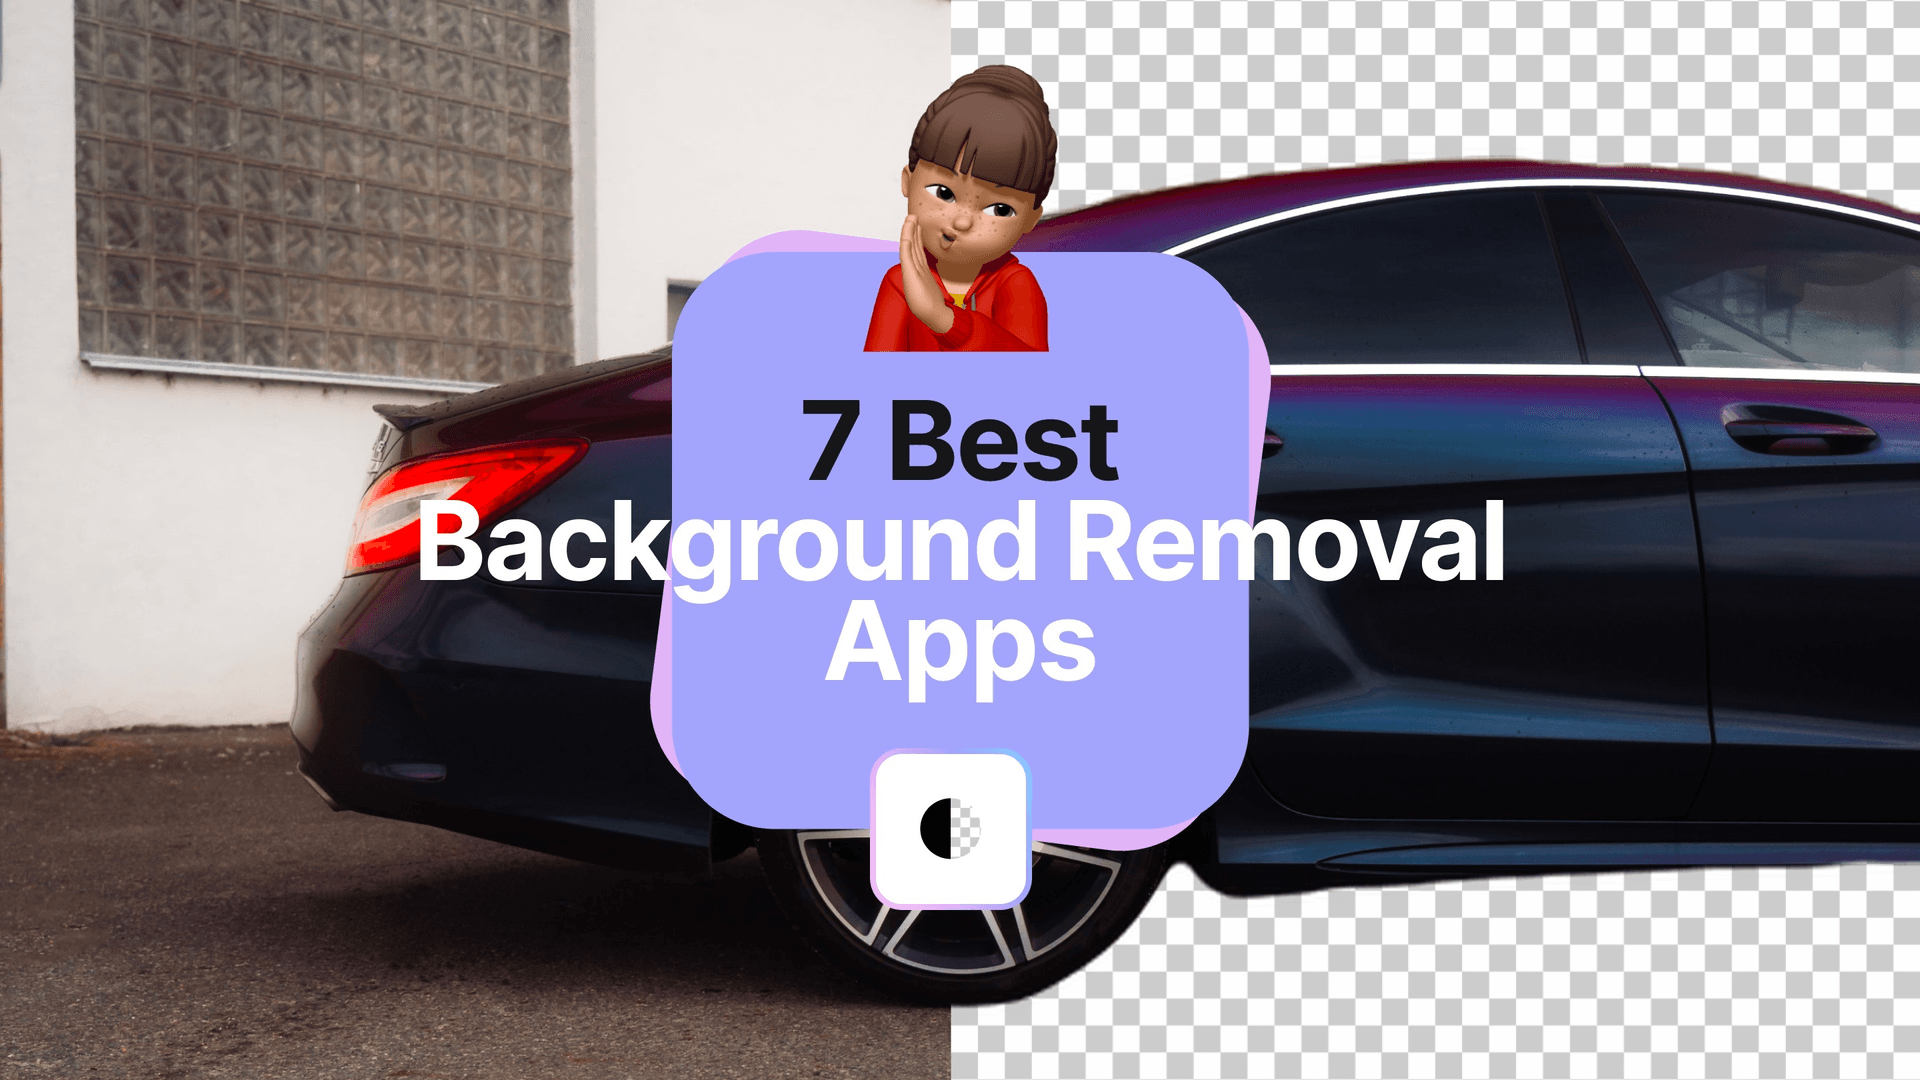 Picture for Top 7 Background Removal Apps article